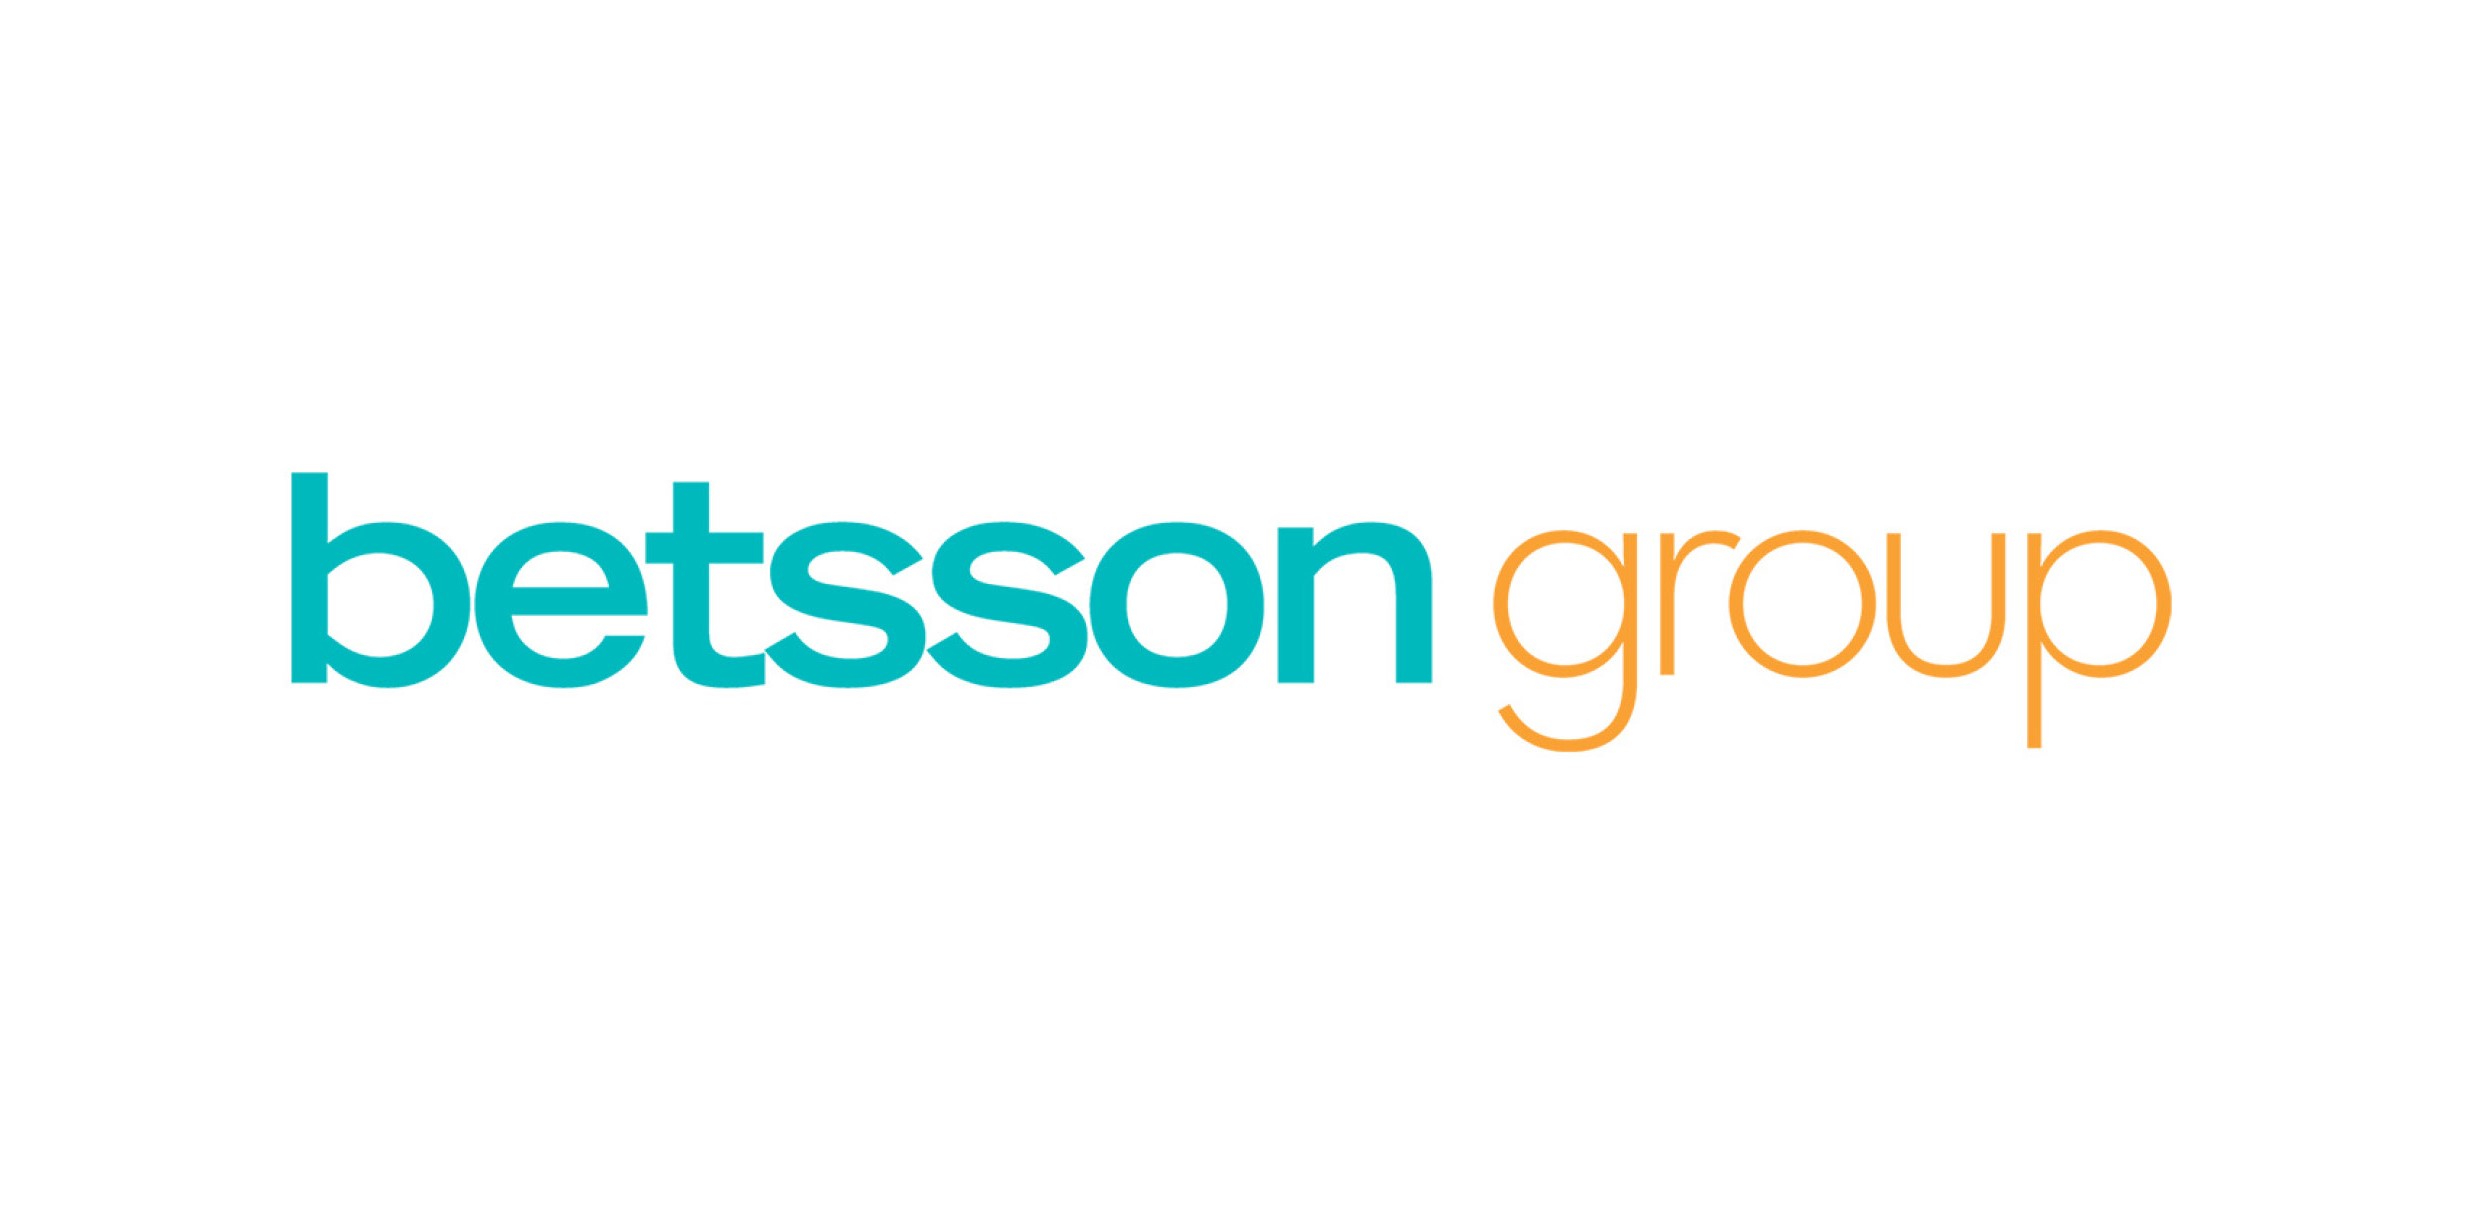 Betsson: A healthy relationship to gaming